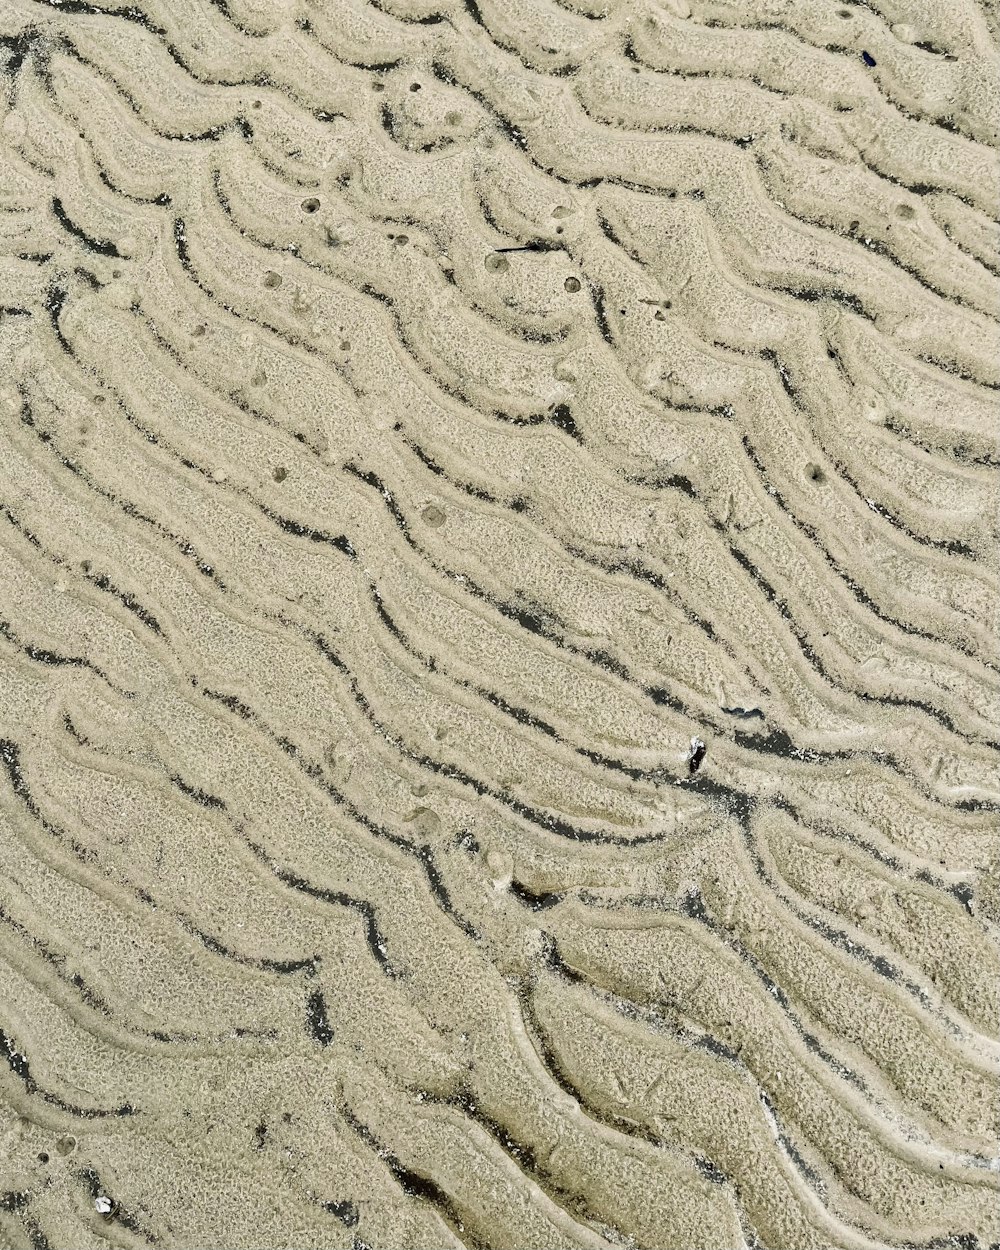 a close up of a sandy beach with waves